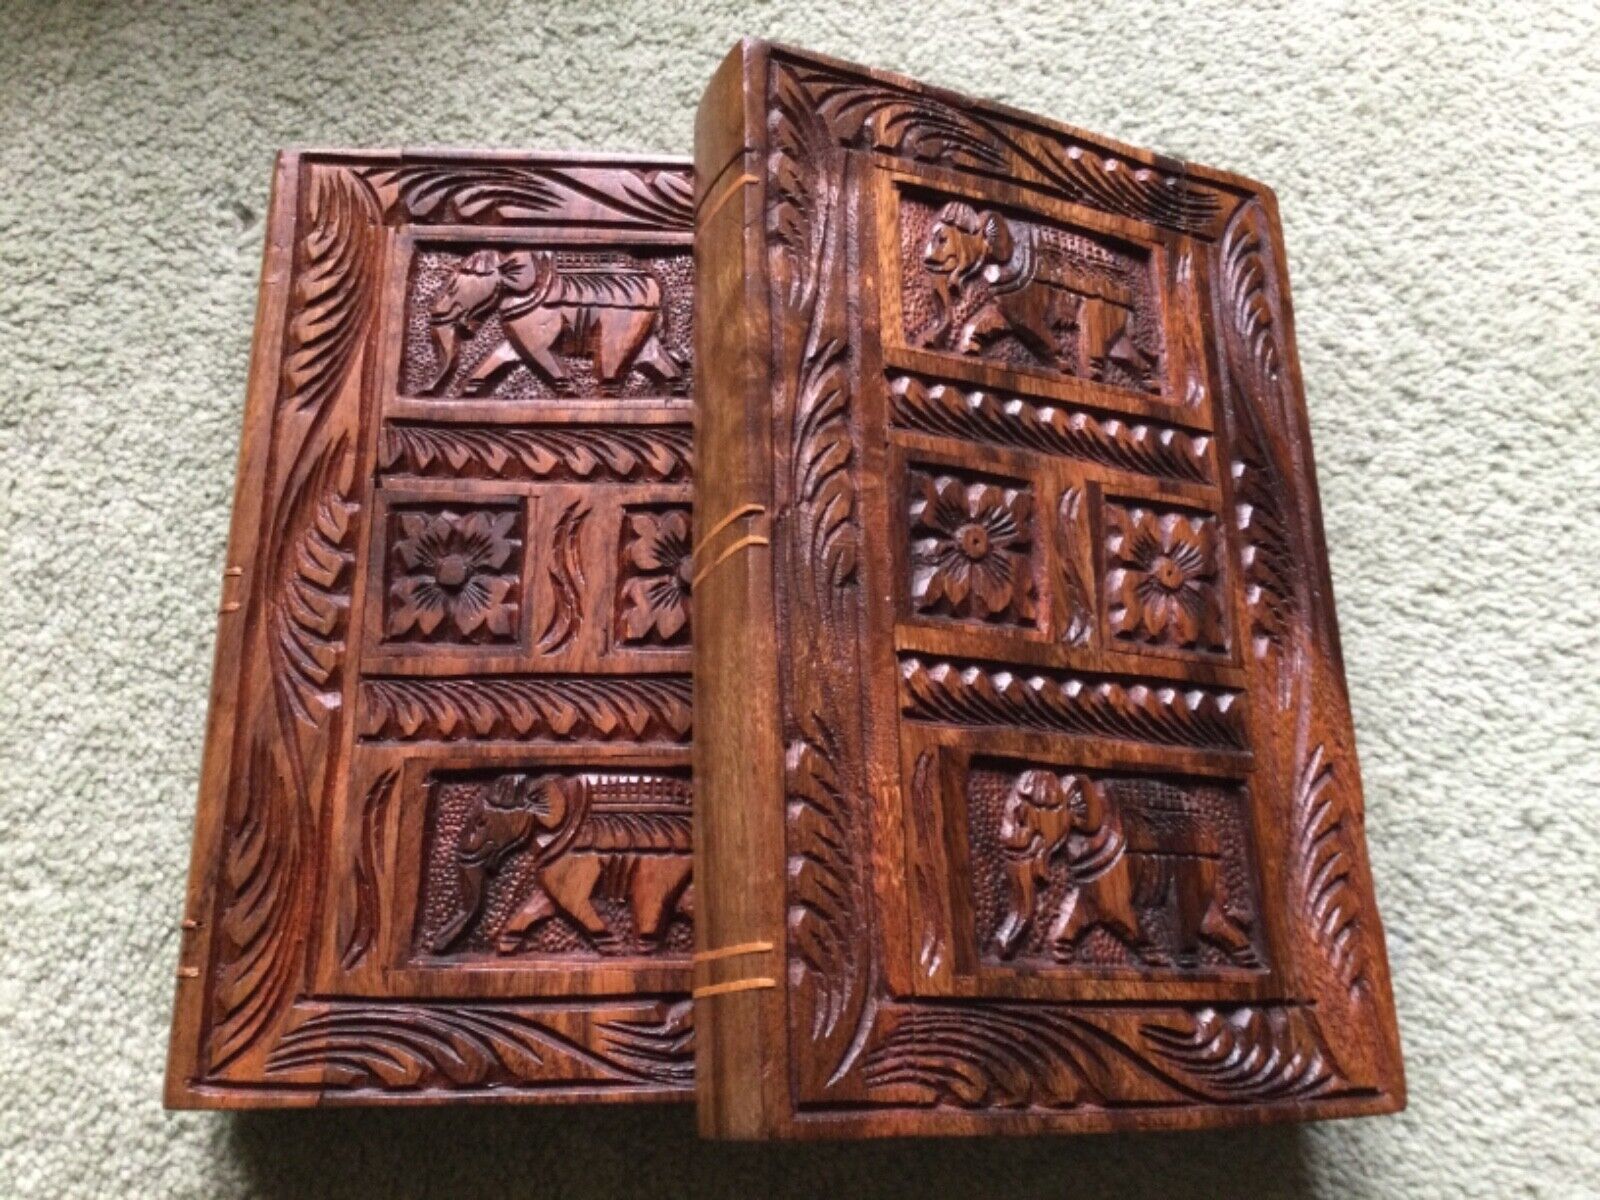 Two hand carved highly decorative solid wooden book ornaments